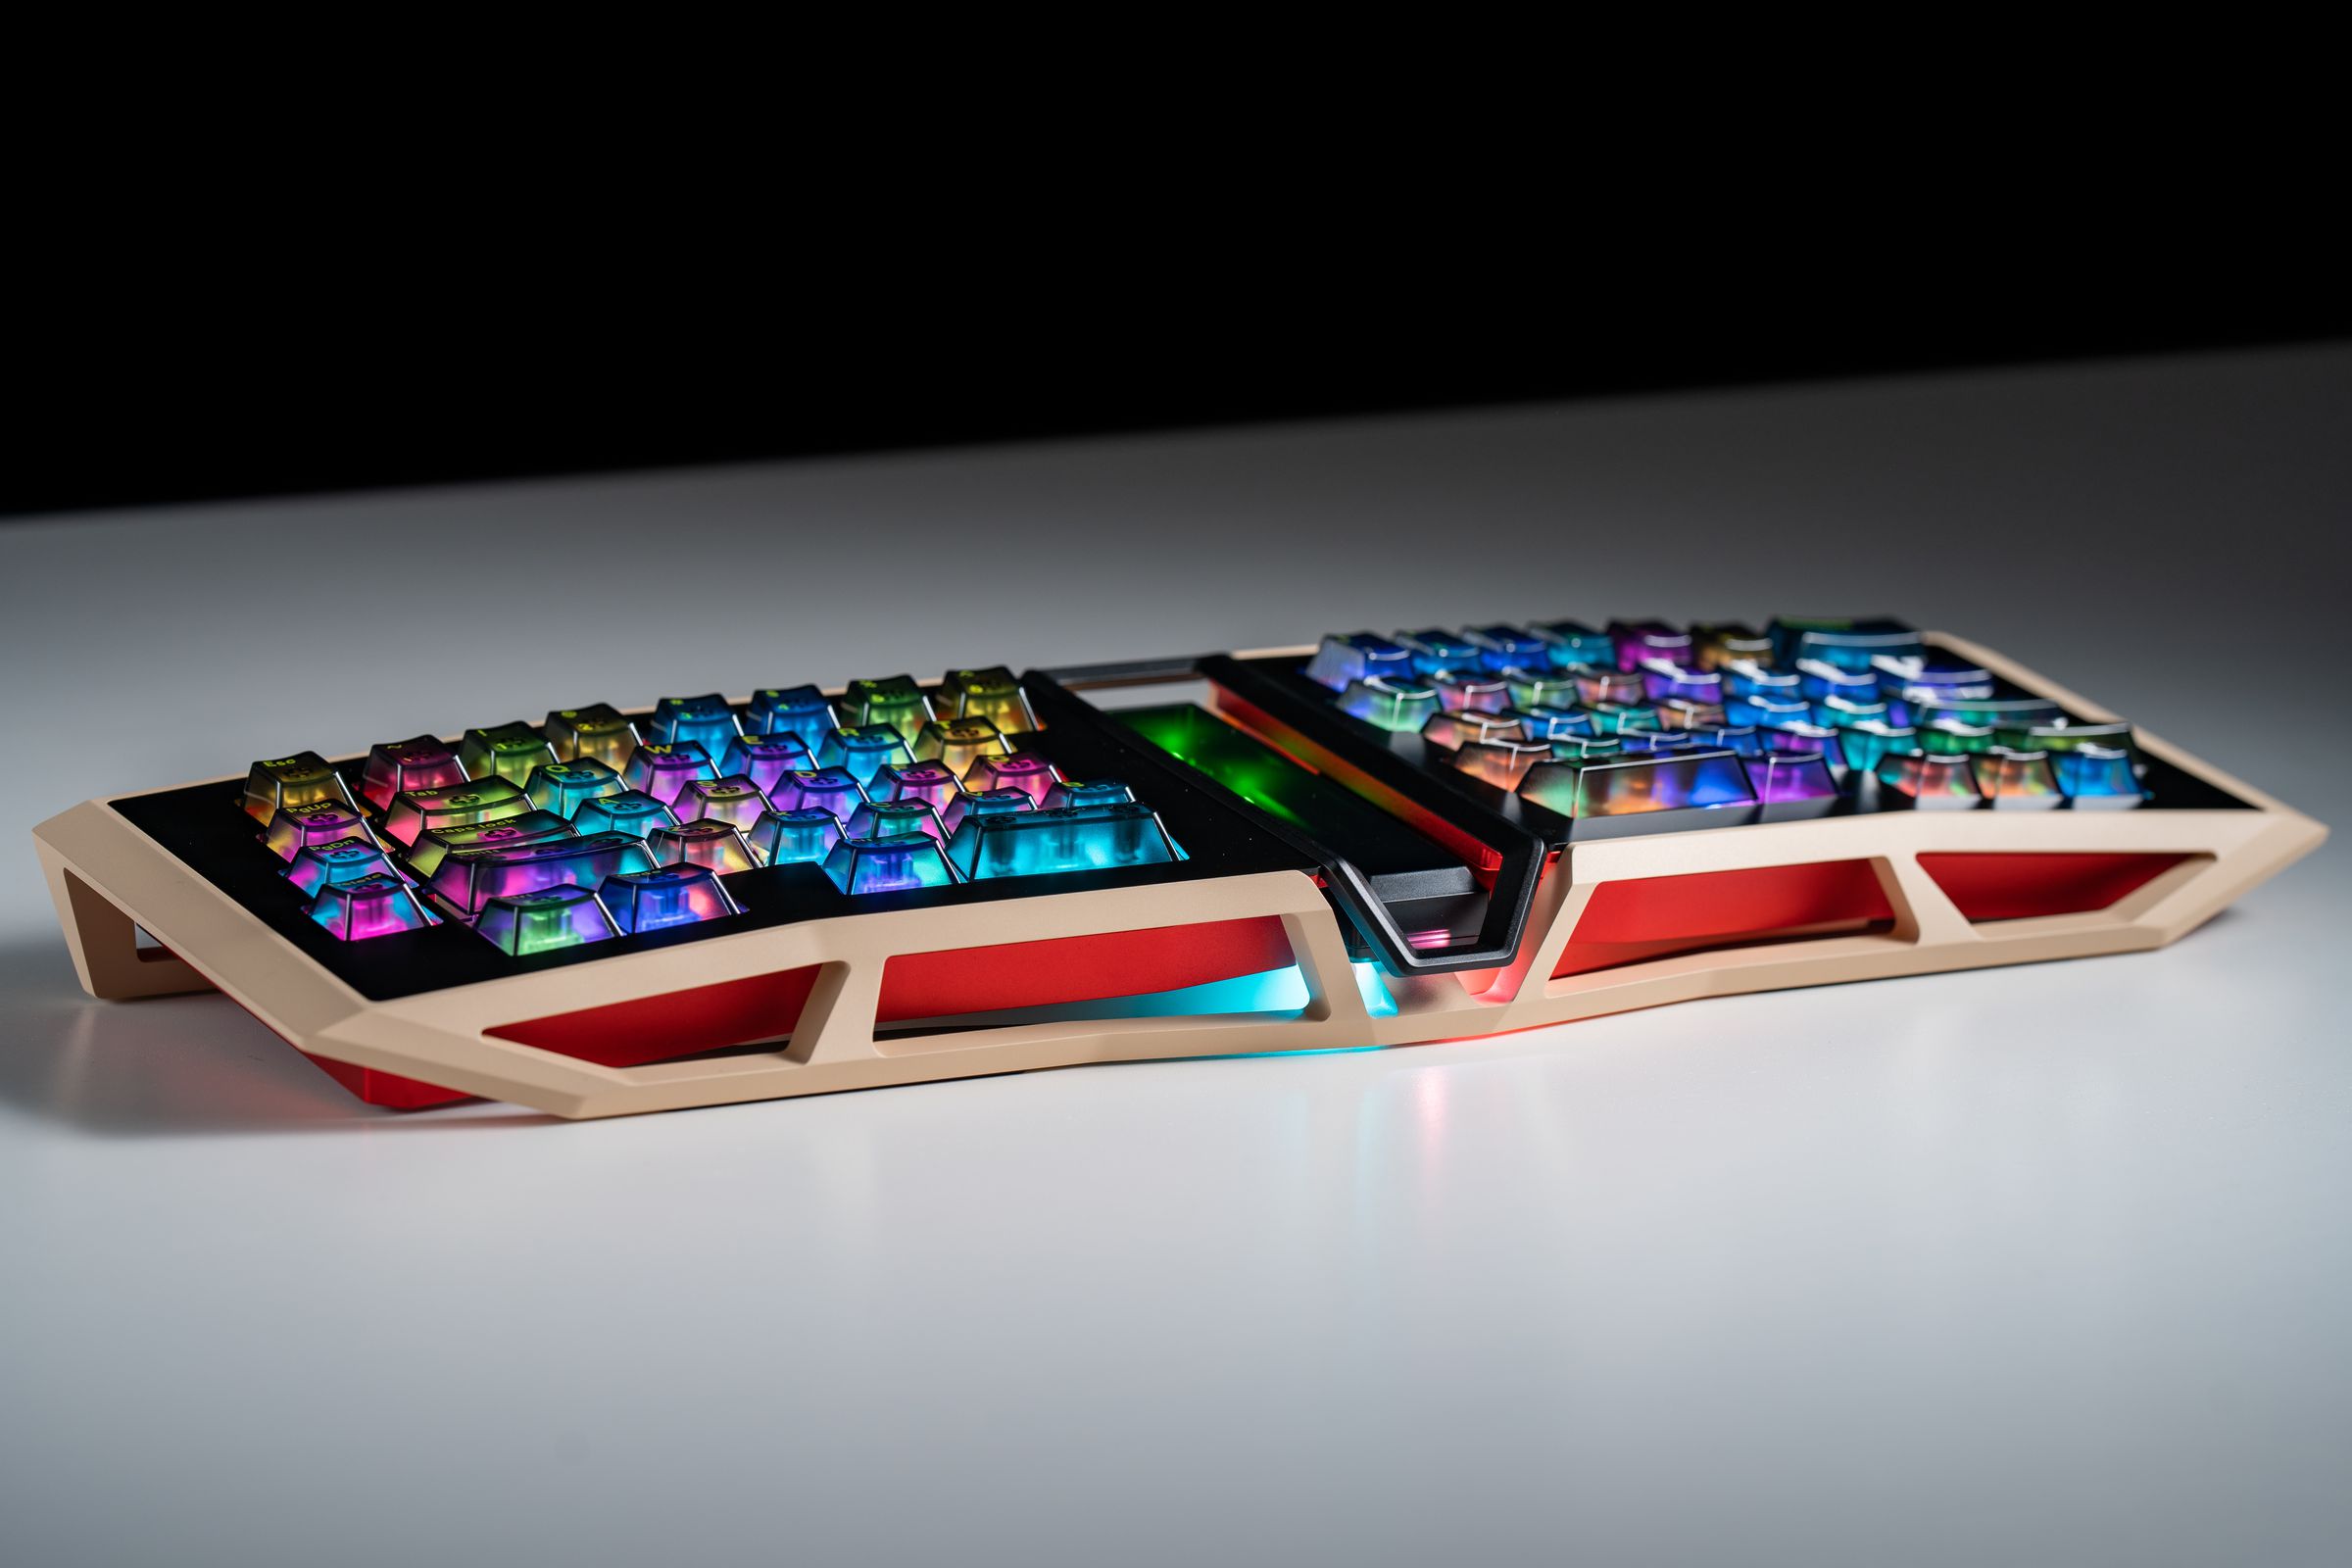 A tan and red ergonomic keyboard with see-through keycaps illuminated by multicolored light, resting on a white table.